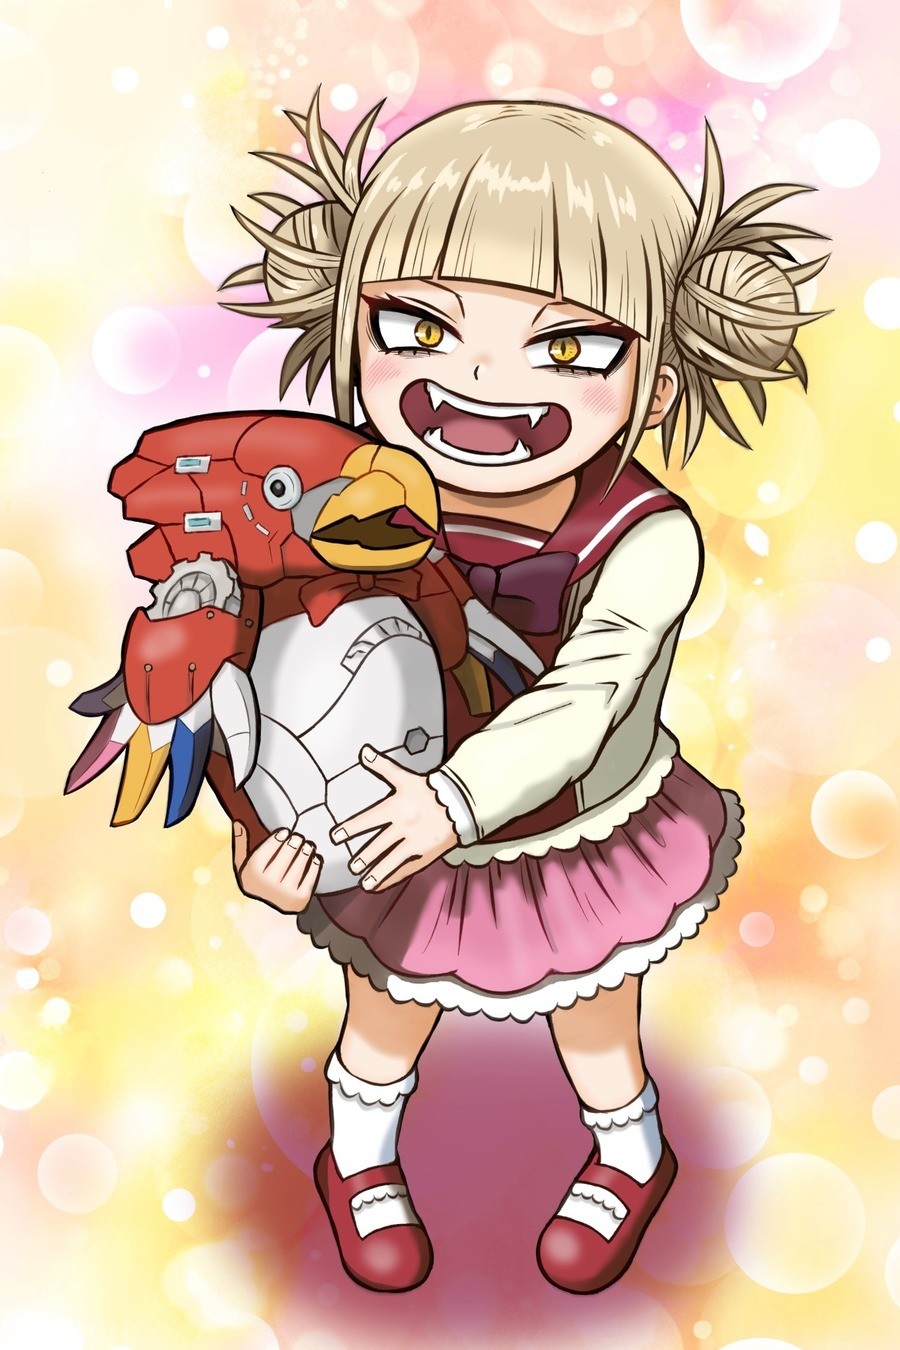 Daily Toga - 750: Smol Toga. join list: DailyToga (476 subs)Mention History Idk, probably a reference to something. - Source: .. The robot bird and Toga apparently have the same Japanese voice actress